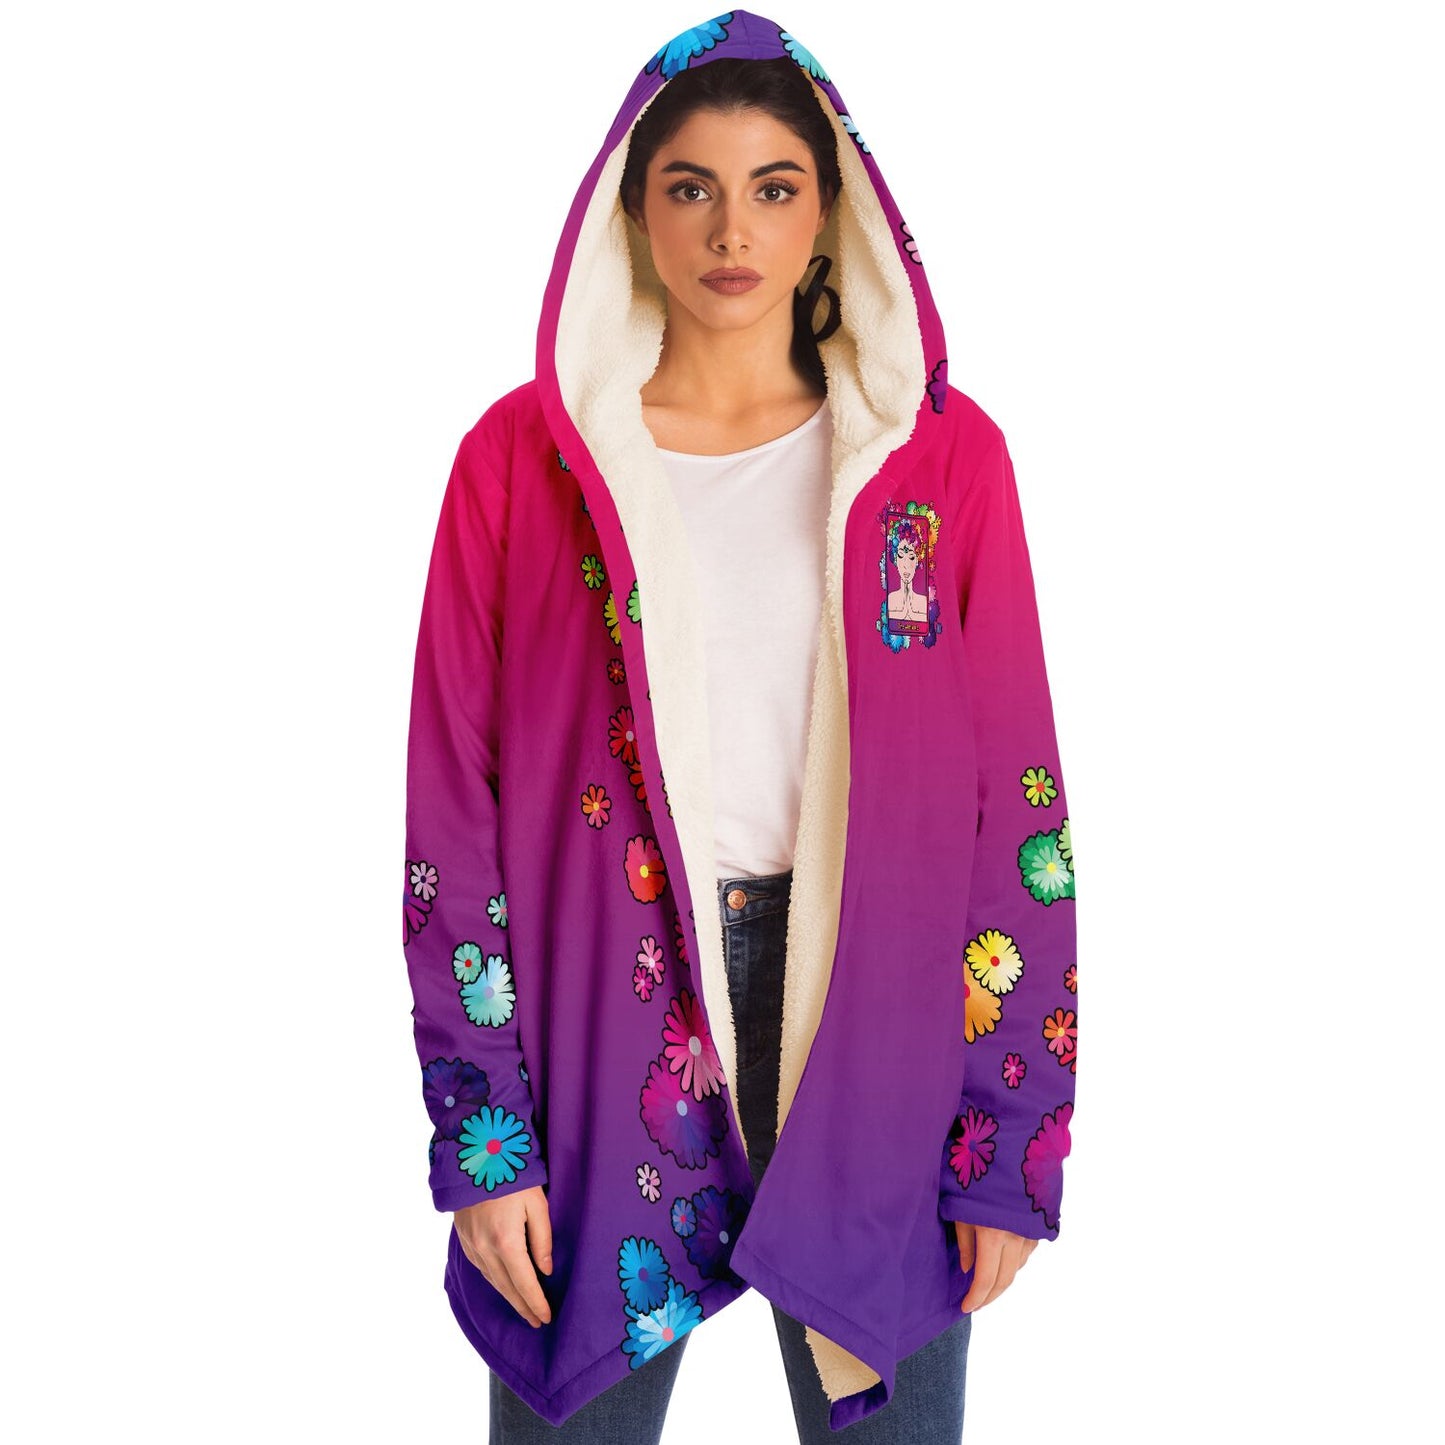 WEIRDO | this pink and purple women’s vest has THE WEIRDO tarot card shown at the front and back of the vest. This vest has micro fleece fiber on the inside so you stay nice and warm during the colder days.